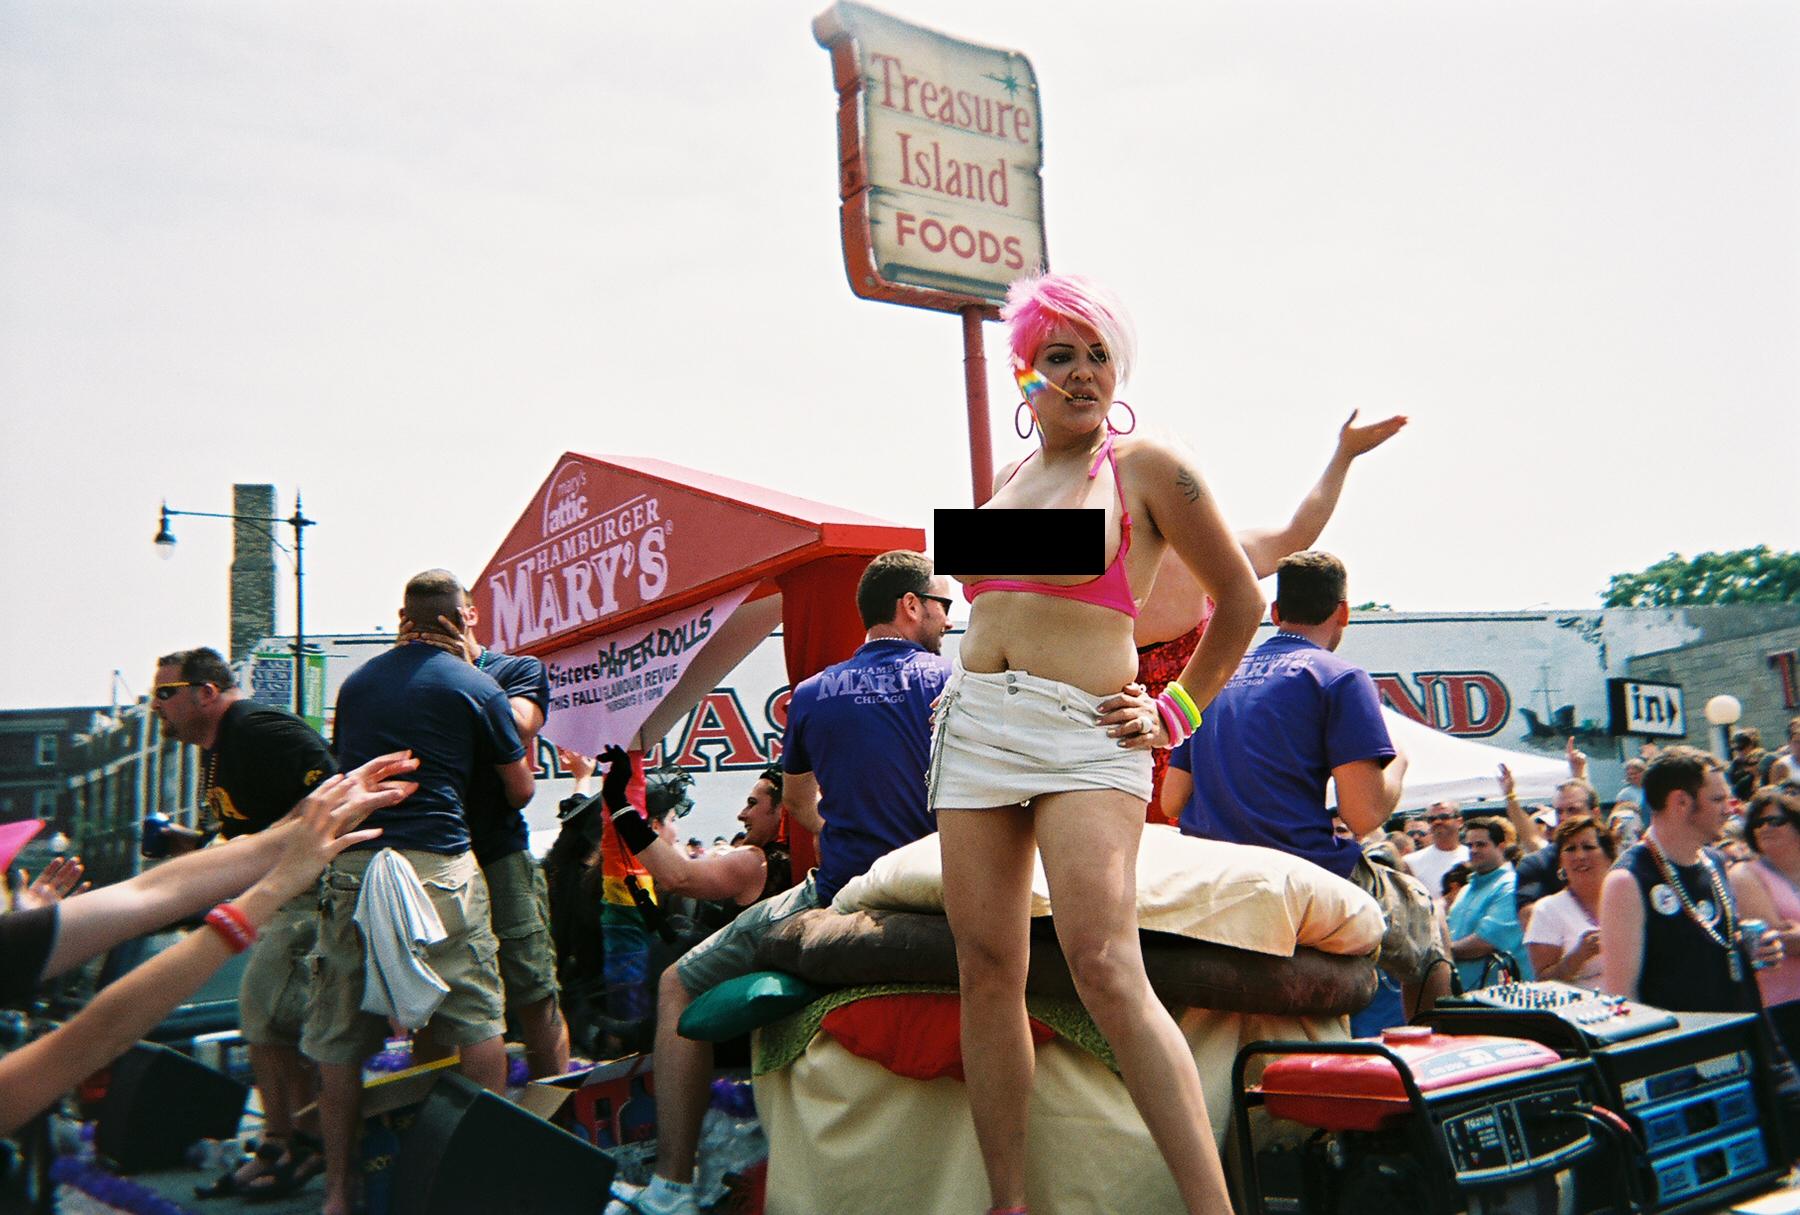 topless_transsexual_chicago_shame_parade_07.JPG